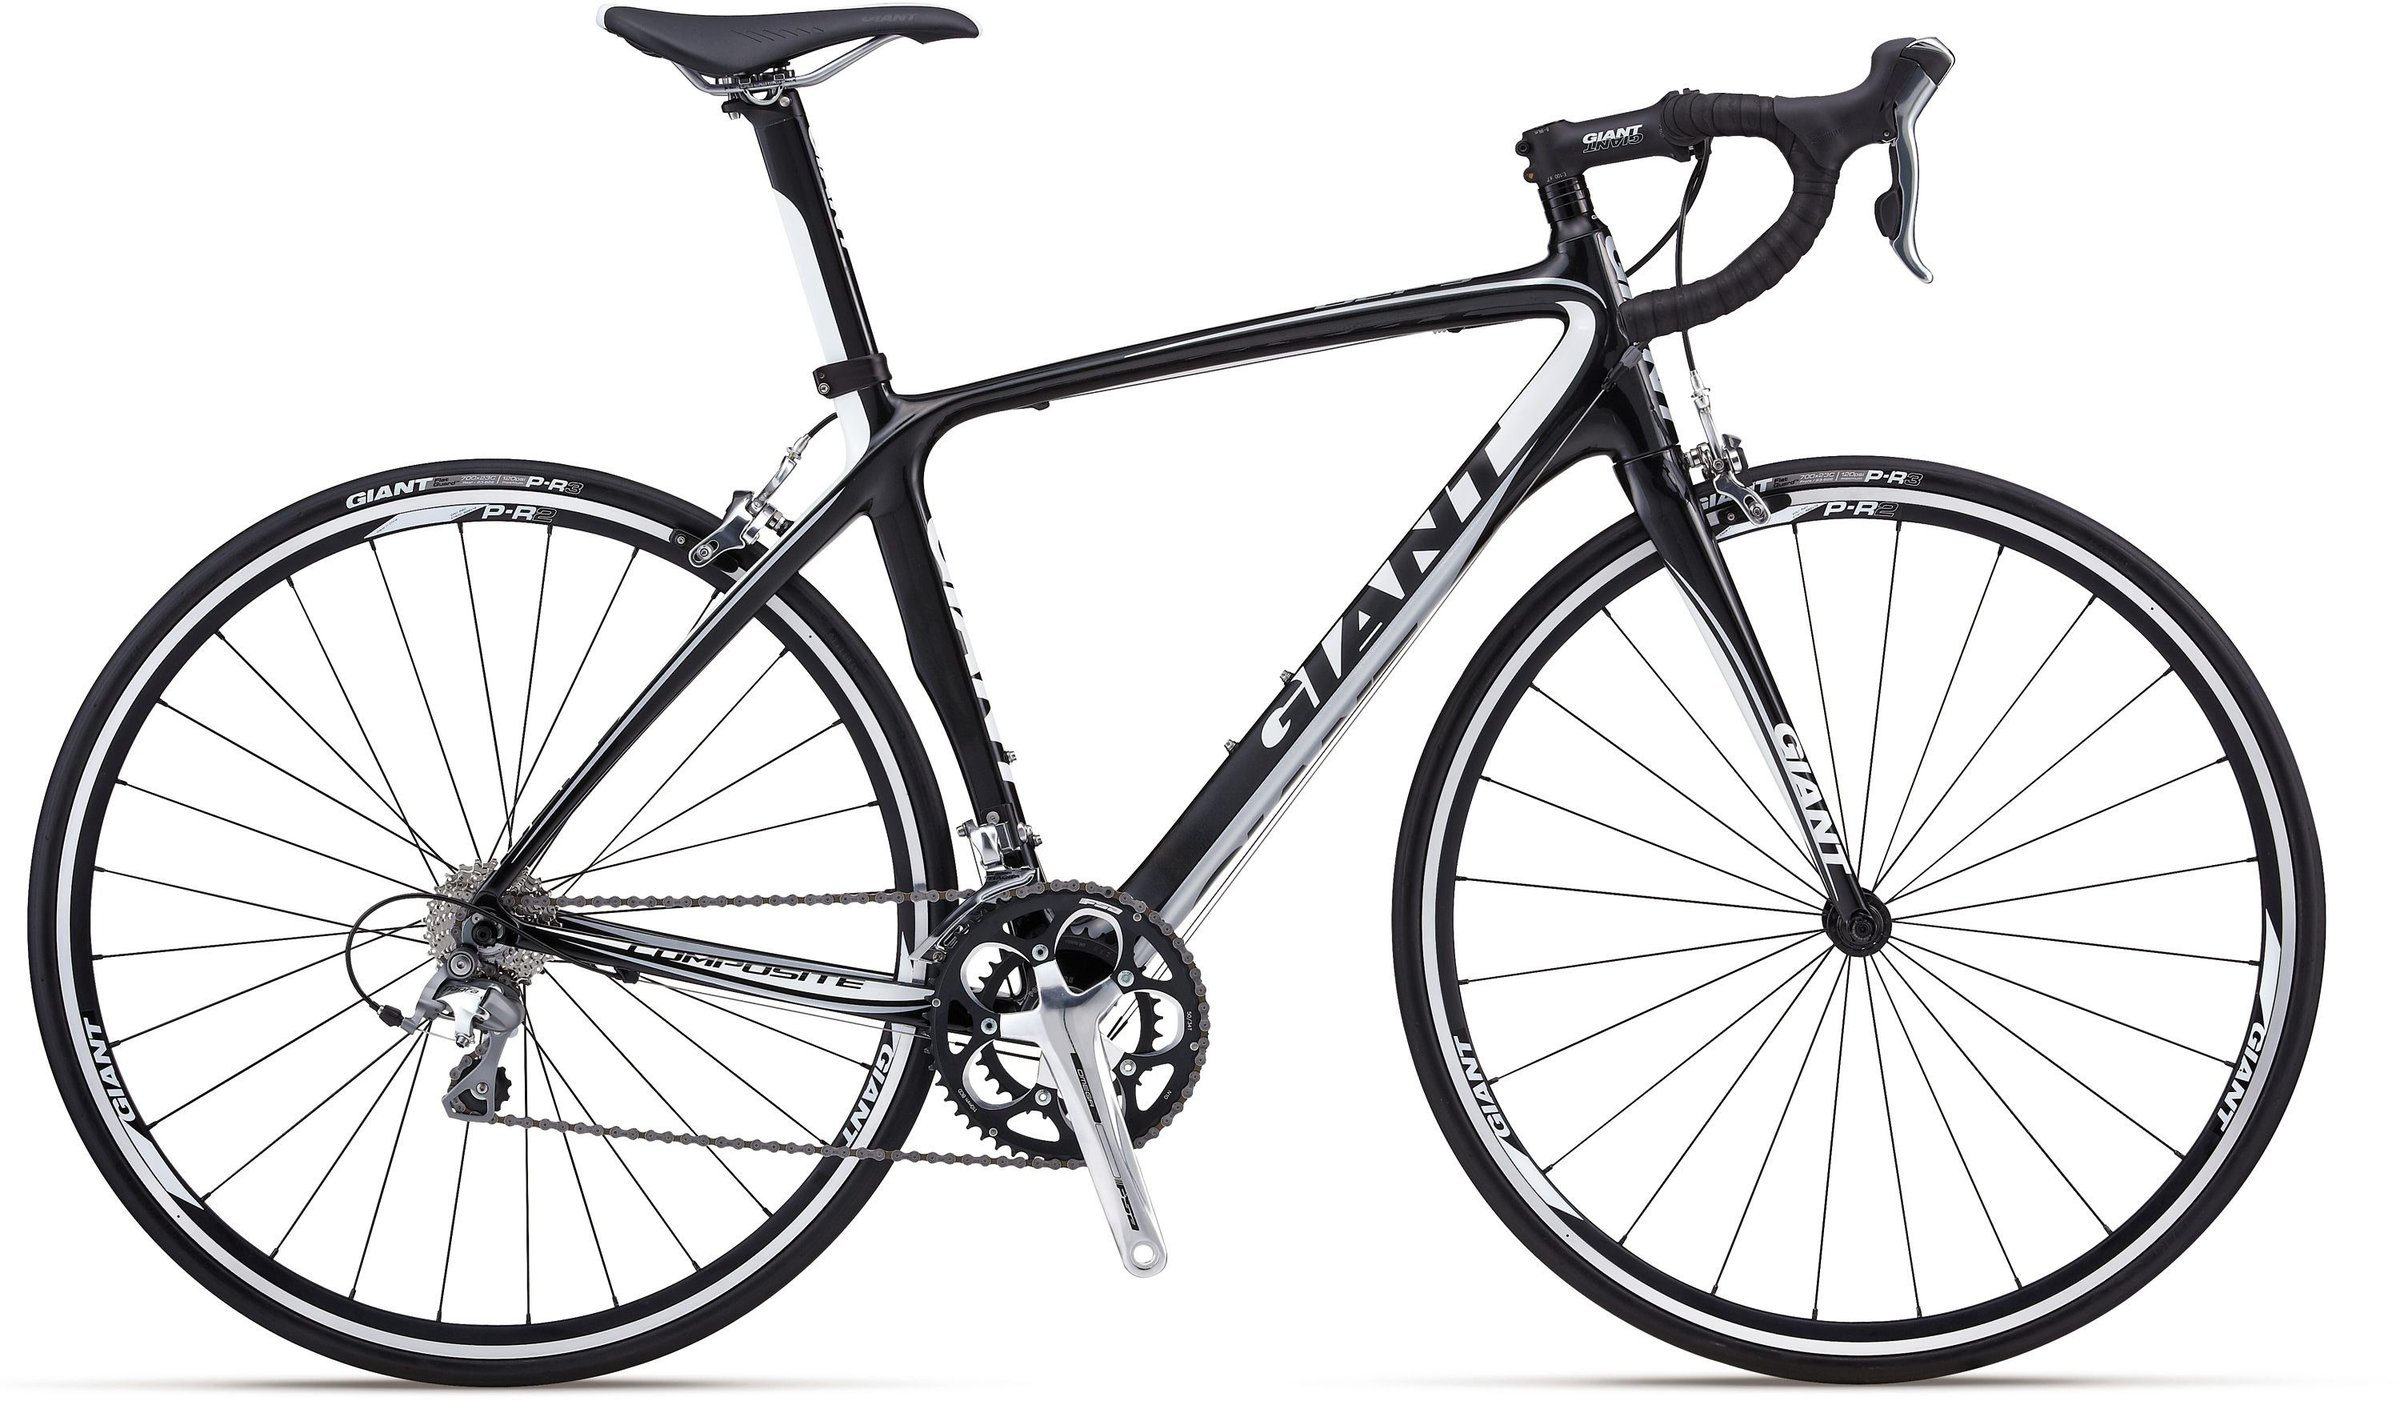 2012 Giant Defy Composite 3 - Bicycle 